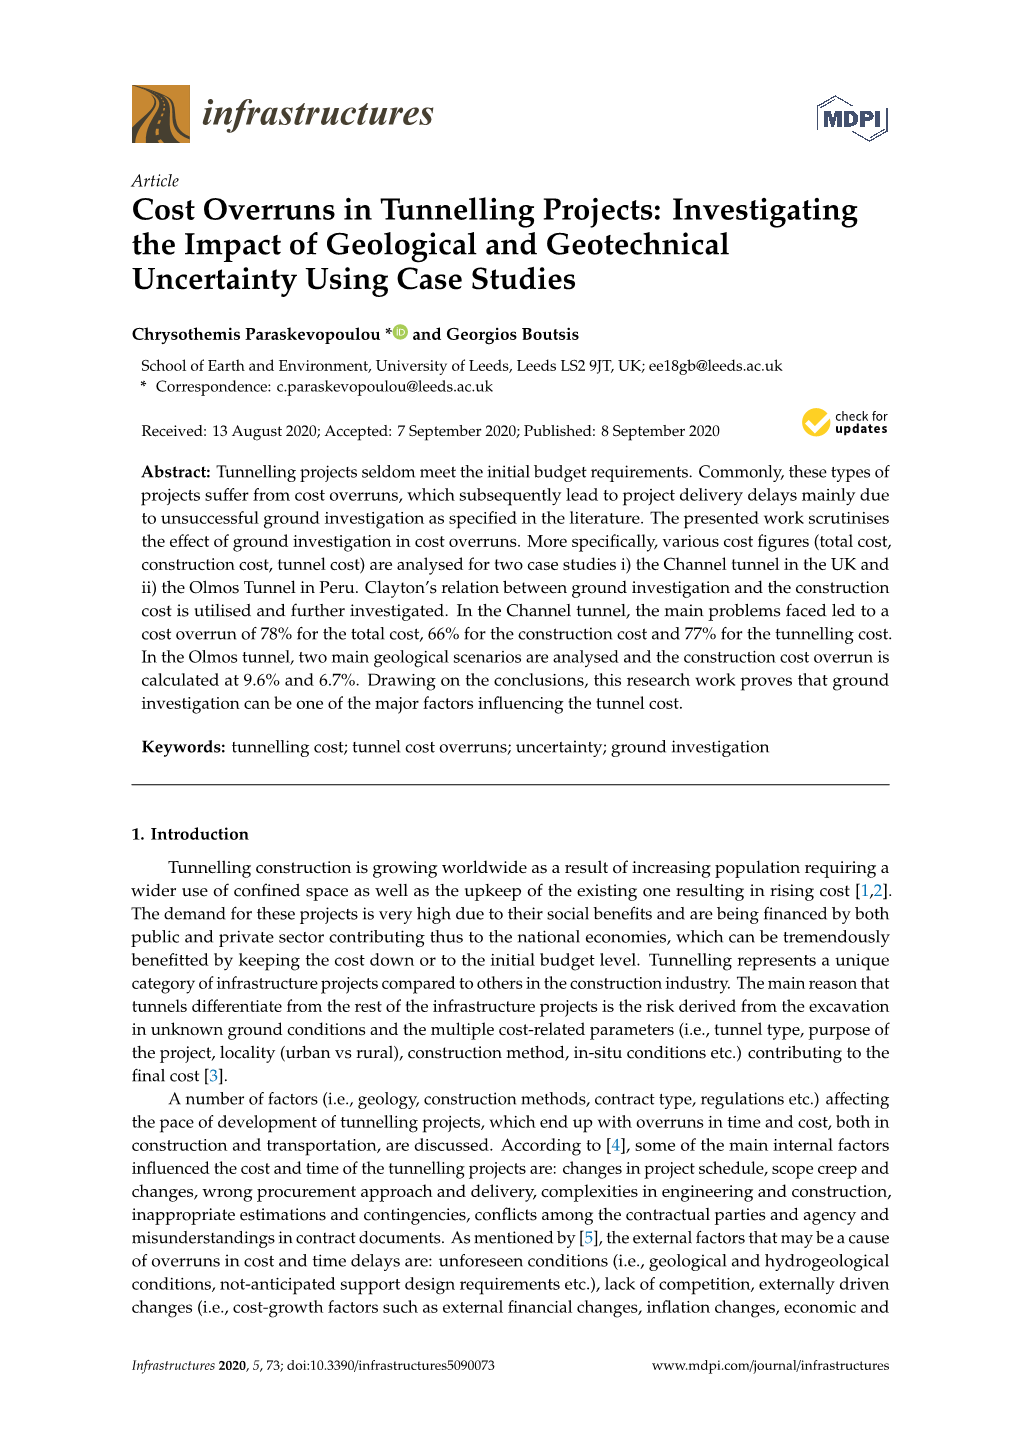 Cost Overruns in Tunnelling Projects: Investigating the Impact of Geological and Geotechnical Uncertainty Using Case Studies